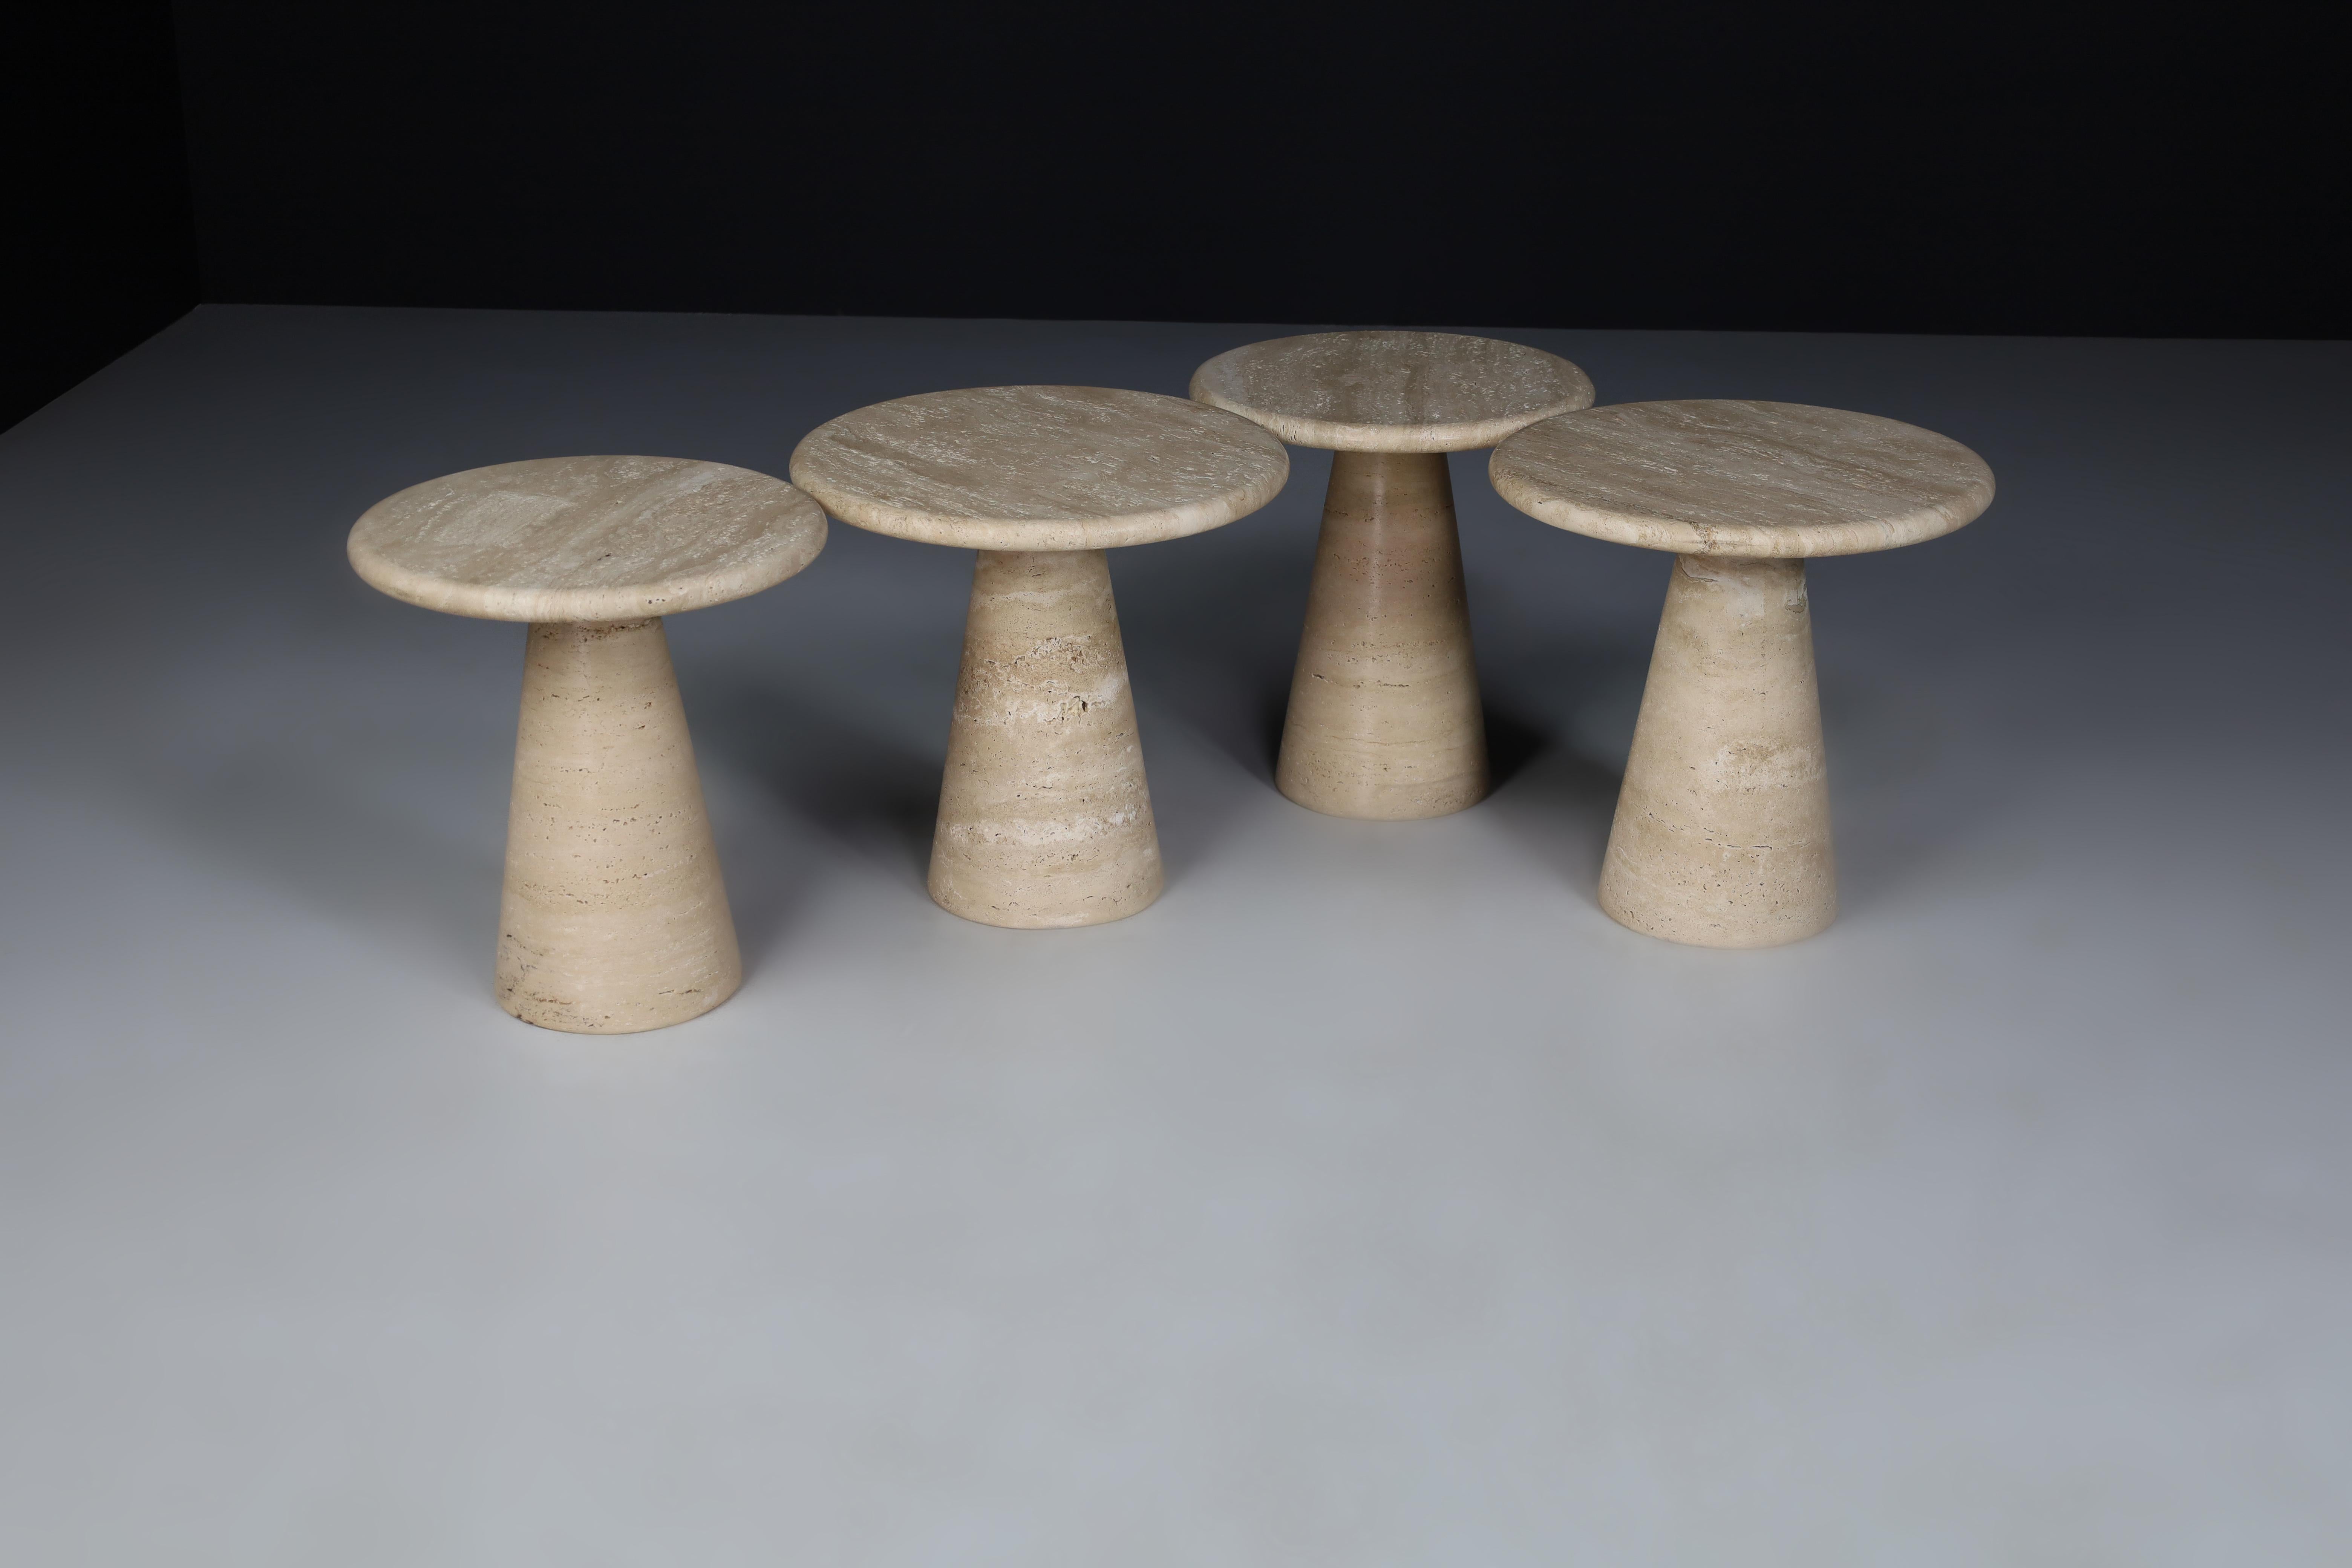 Set of four modern circular travertine side tables or coffee tables , Italy 1980s.

A set of four of circular side tables style of Angelo Mangiarotti in travertine with a conical shaped base. The form is extremely simple allowing the beauty and